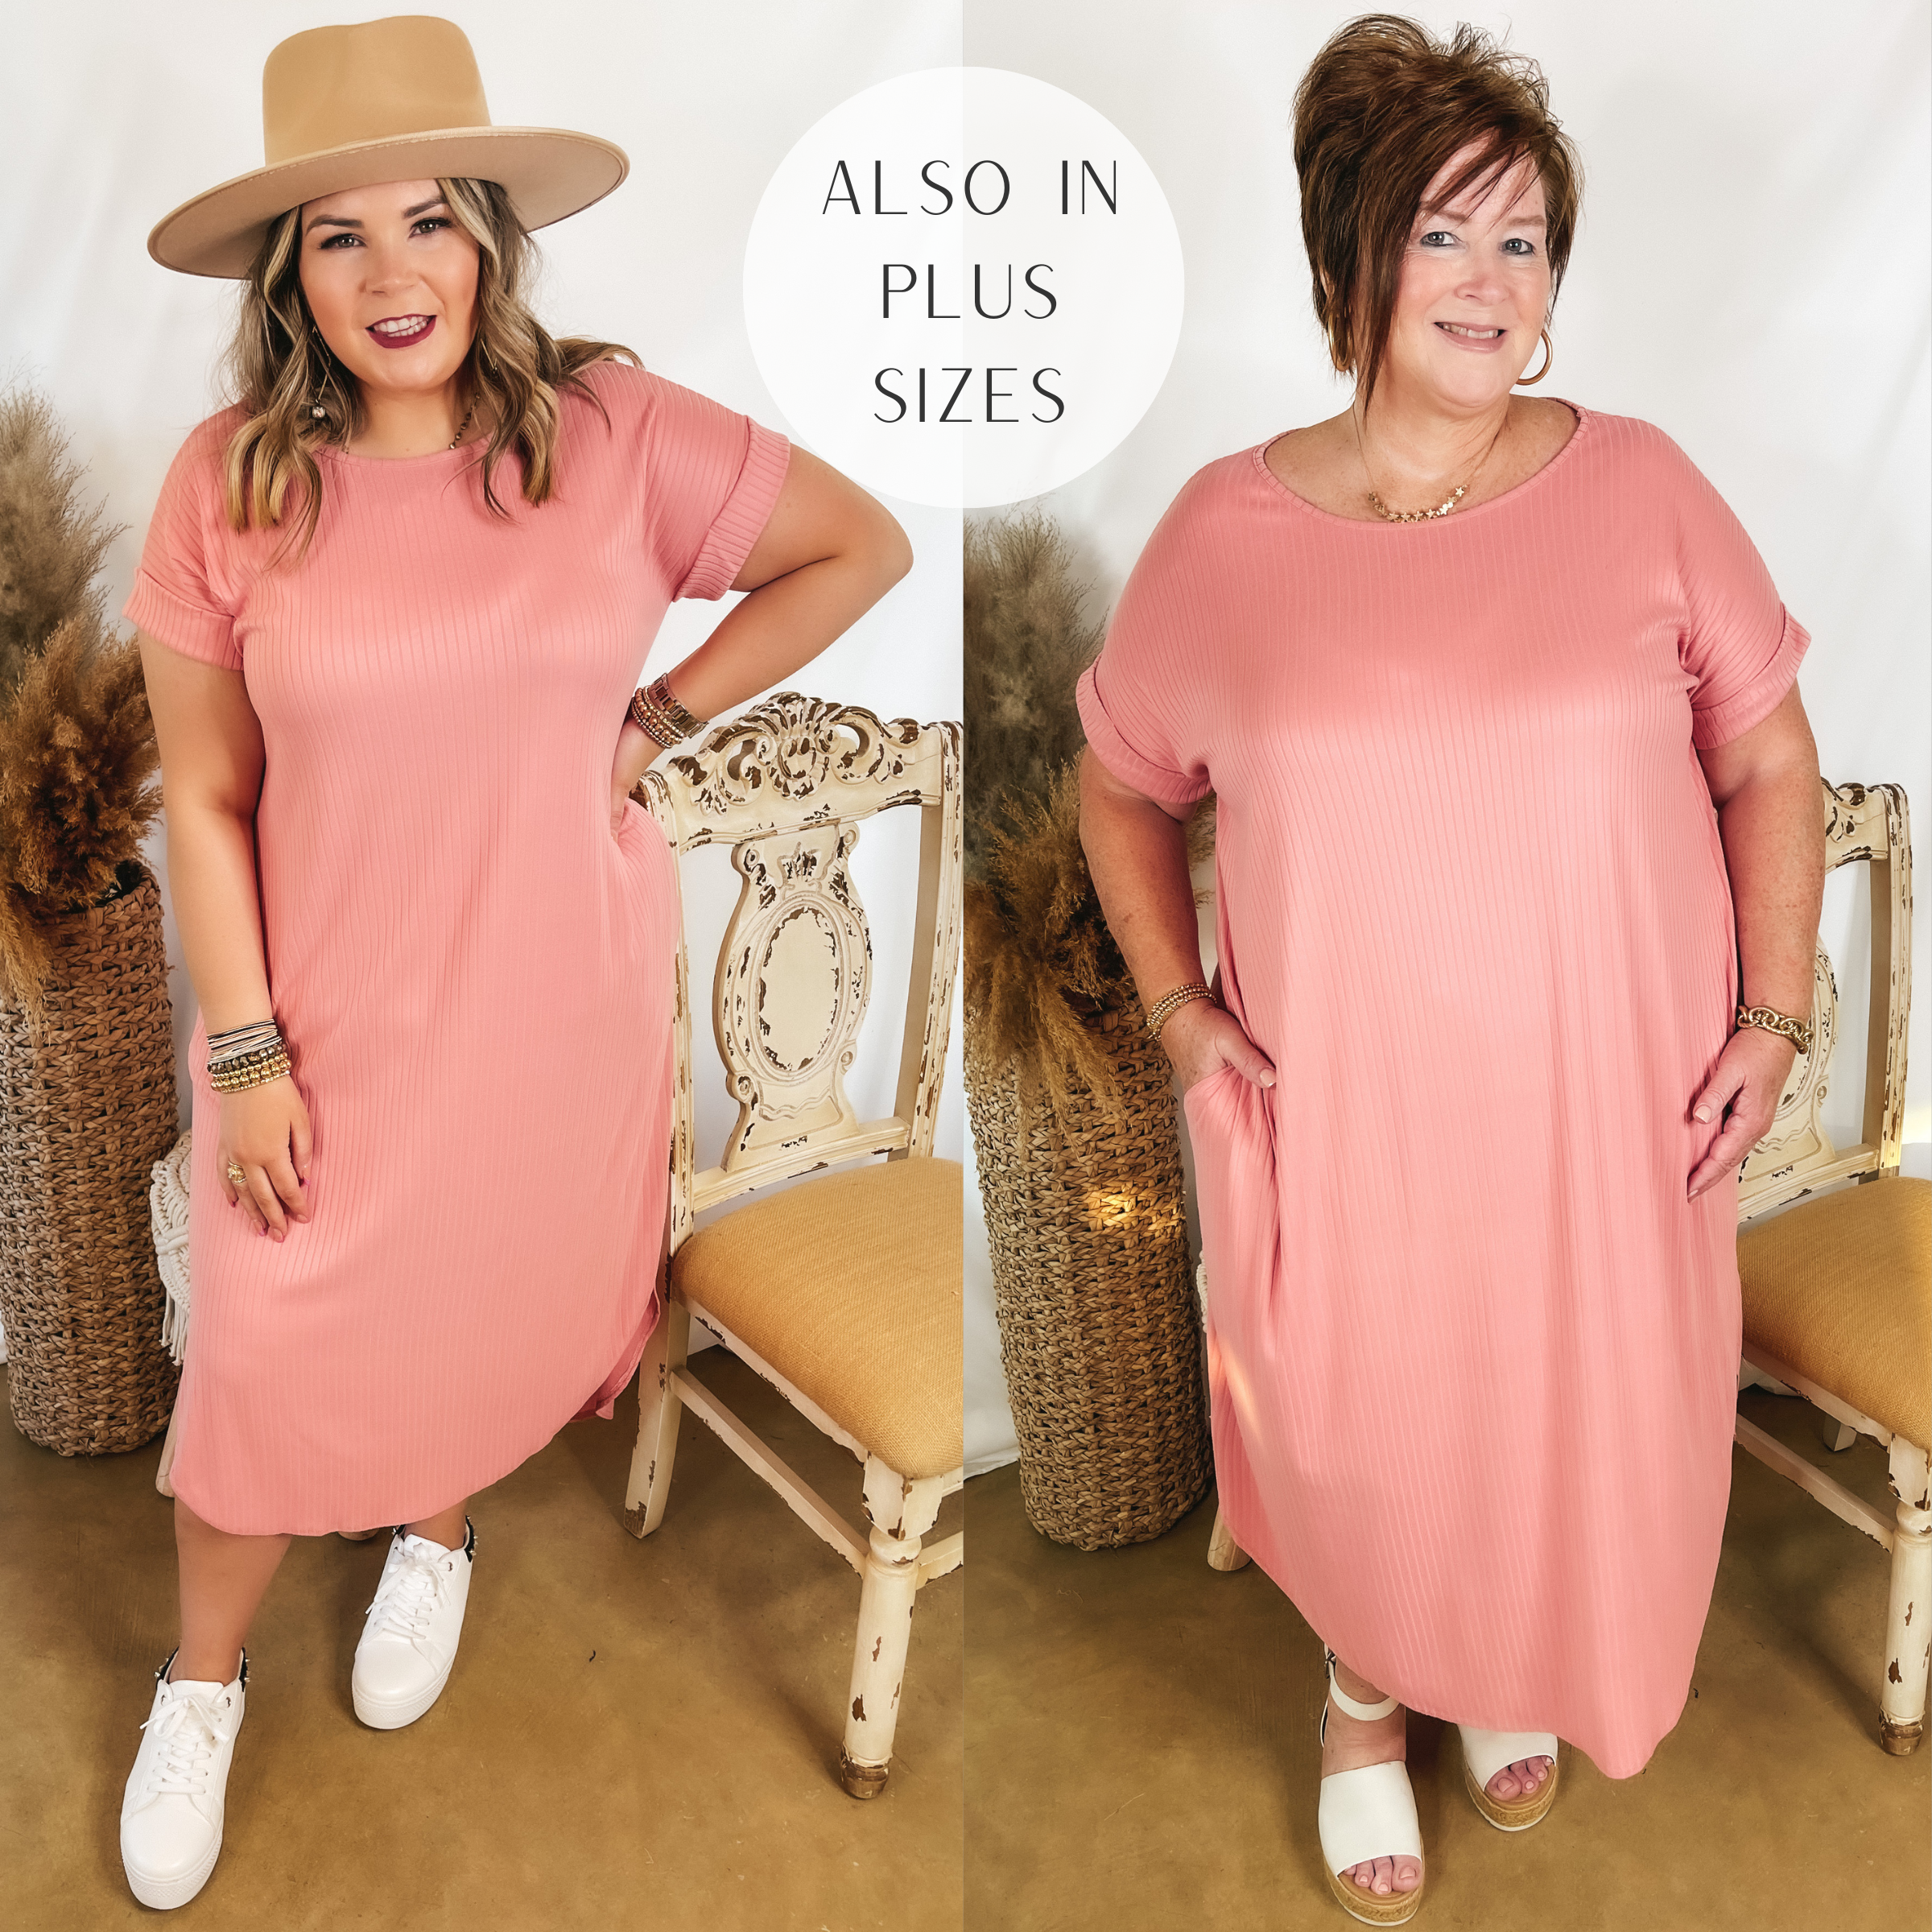 Models are wearing a peach pink ribbed midi dress. Size large model has it paired with white sneakers and a tan rancher hat. Plus size model has it paired with gold jewelry and white sandals. 